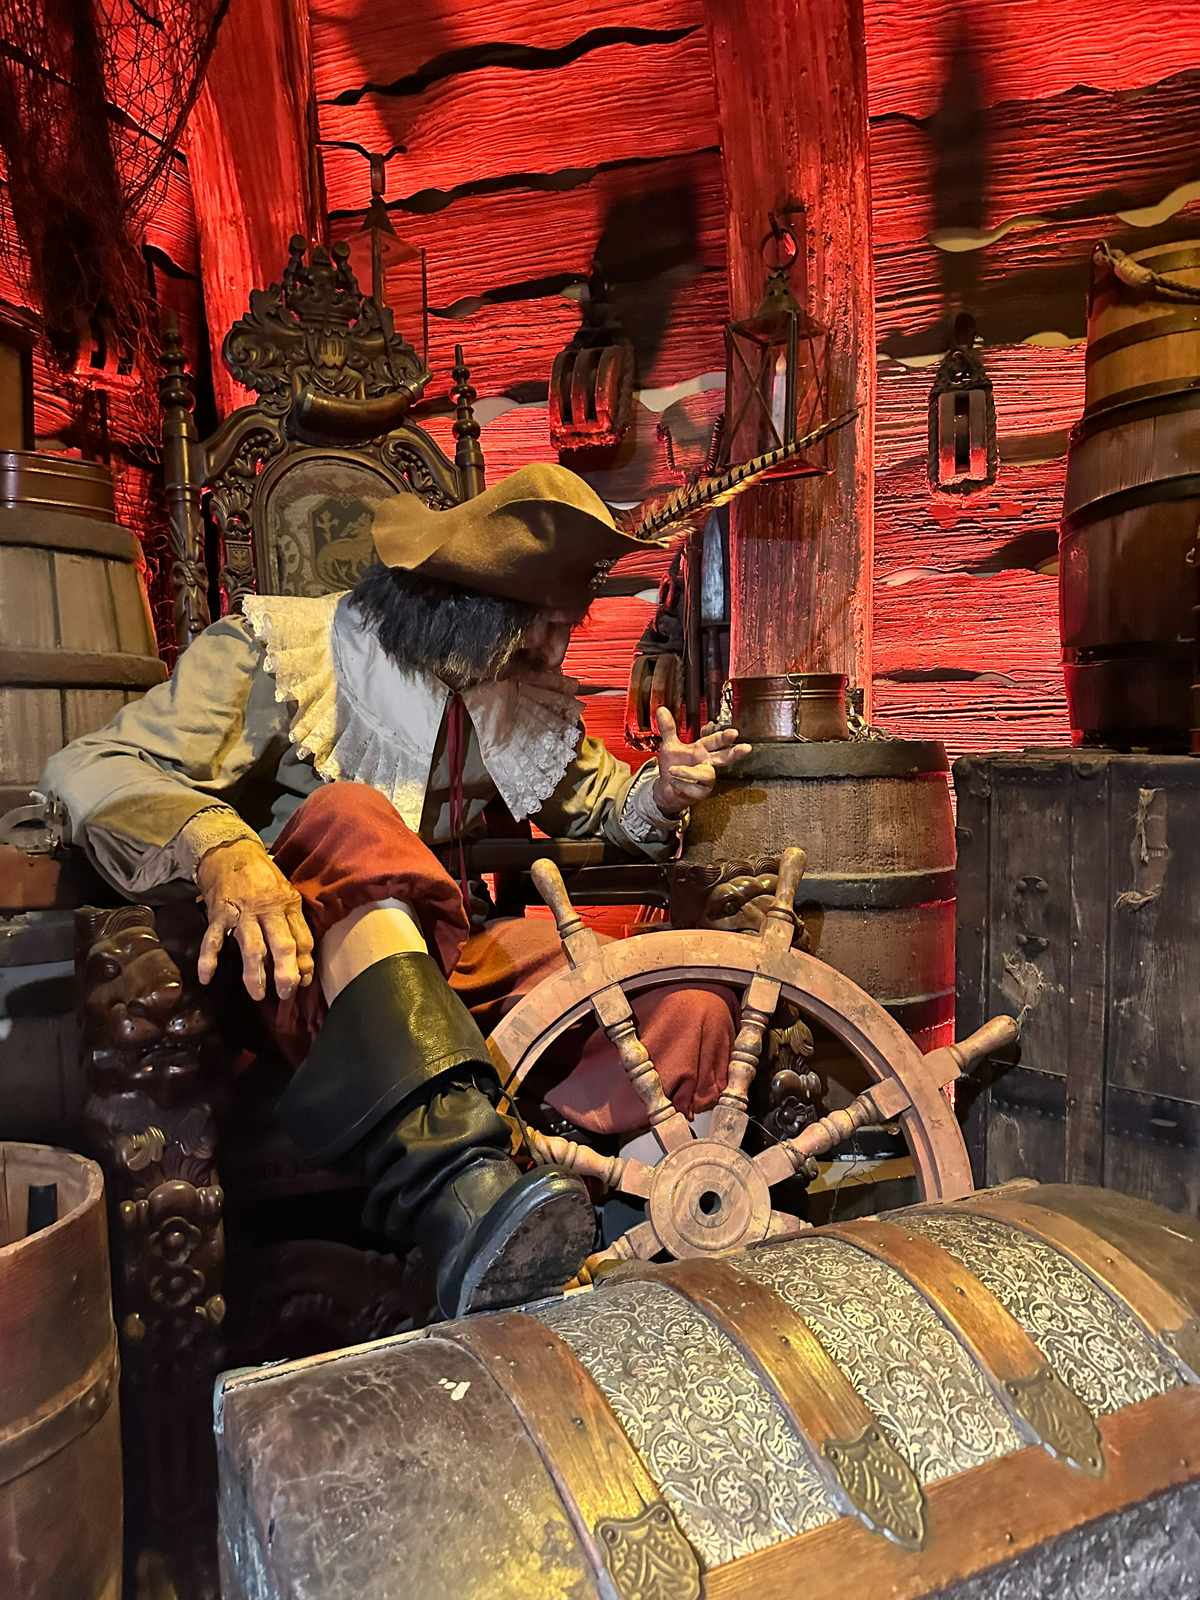 visit the Pirate Museum when you spend a Weekend in St. Augustine